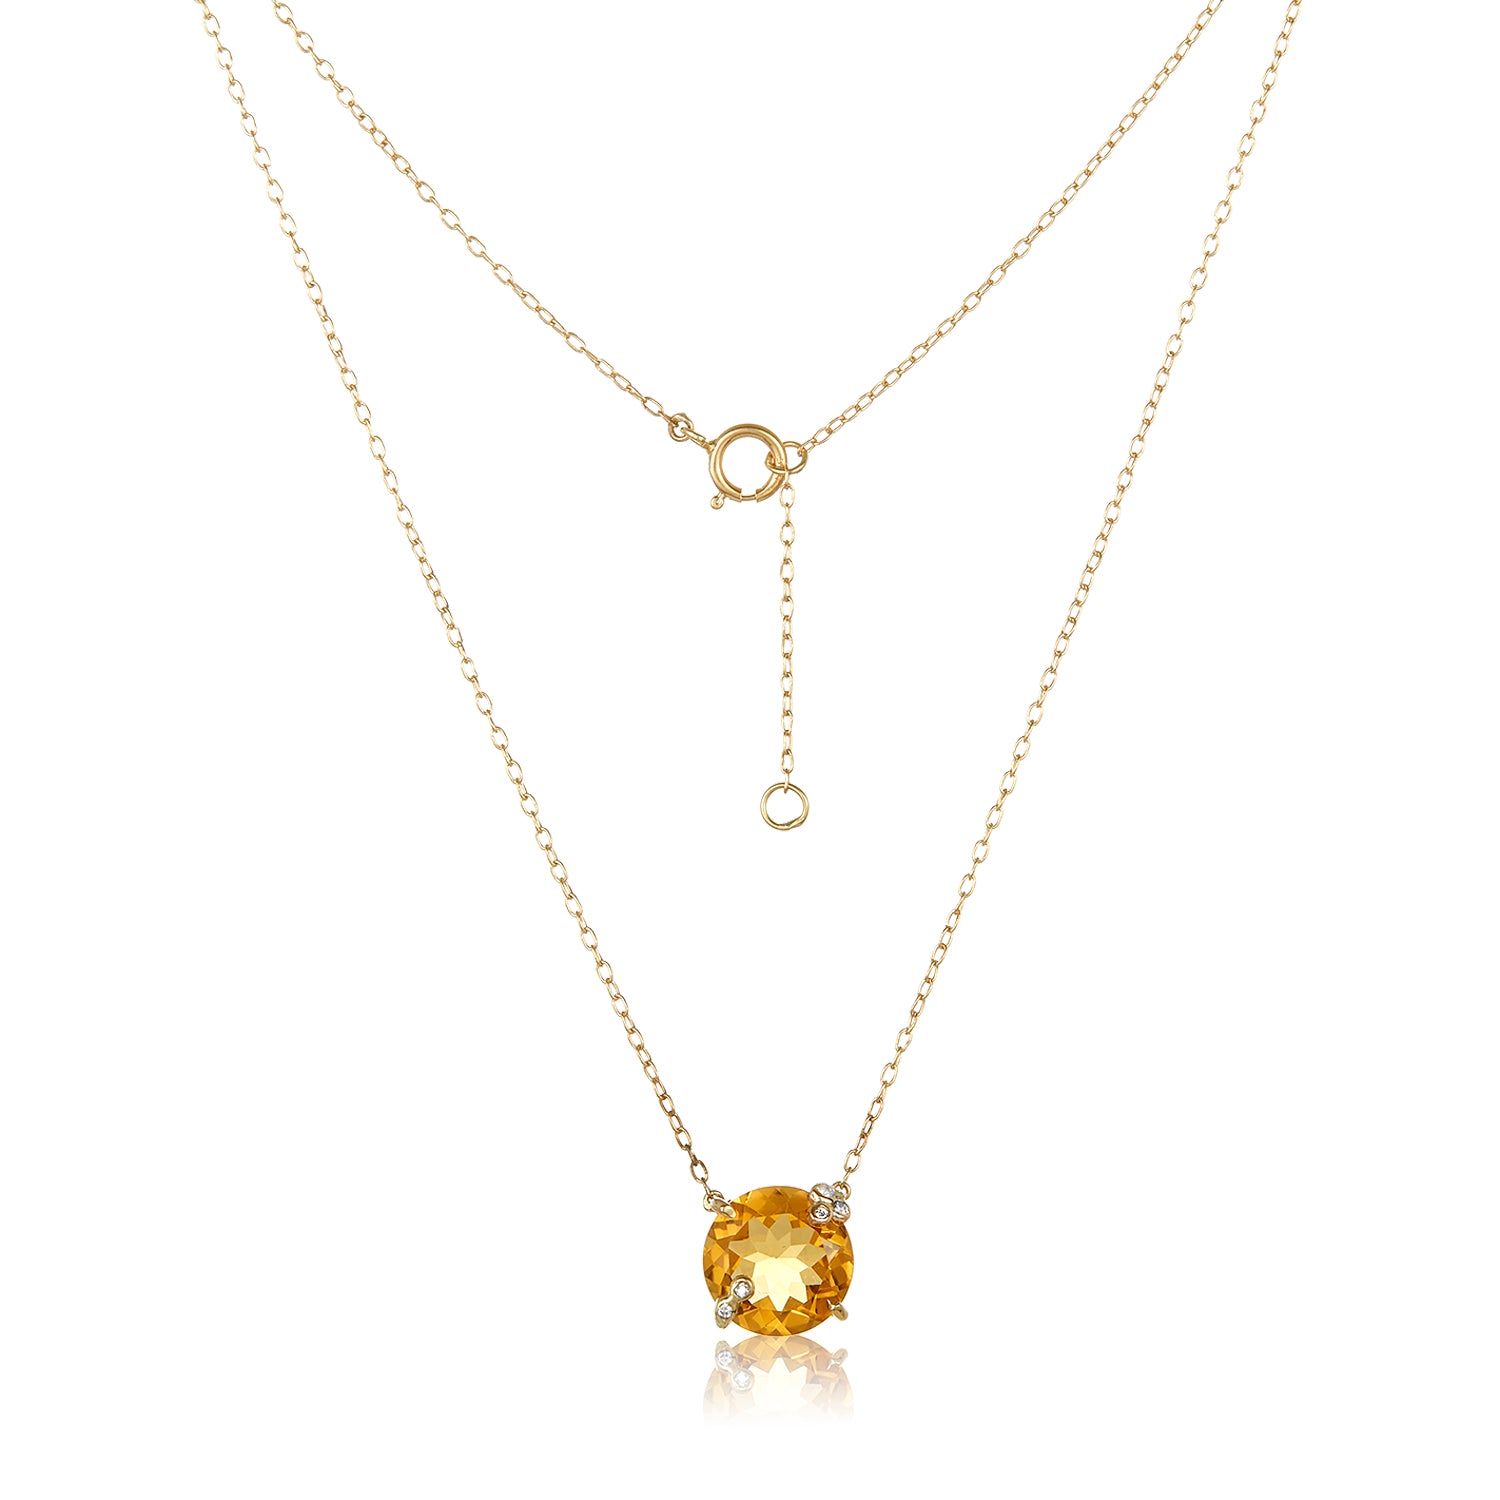 Amelie Necklace - White Topaz, Green Amethyst, Citrine – Mabel Chong